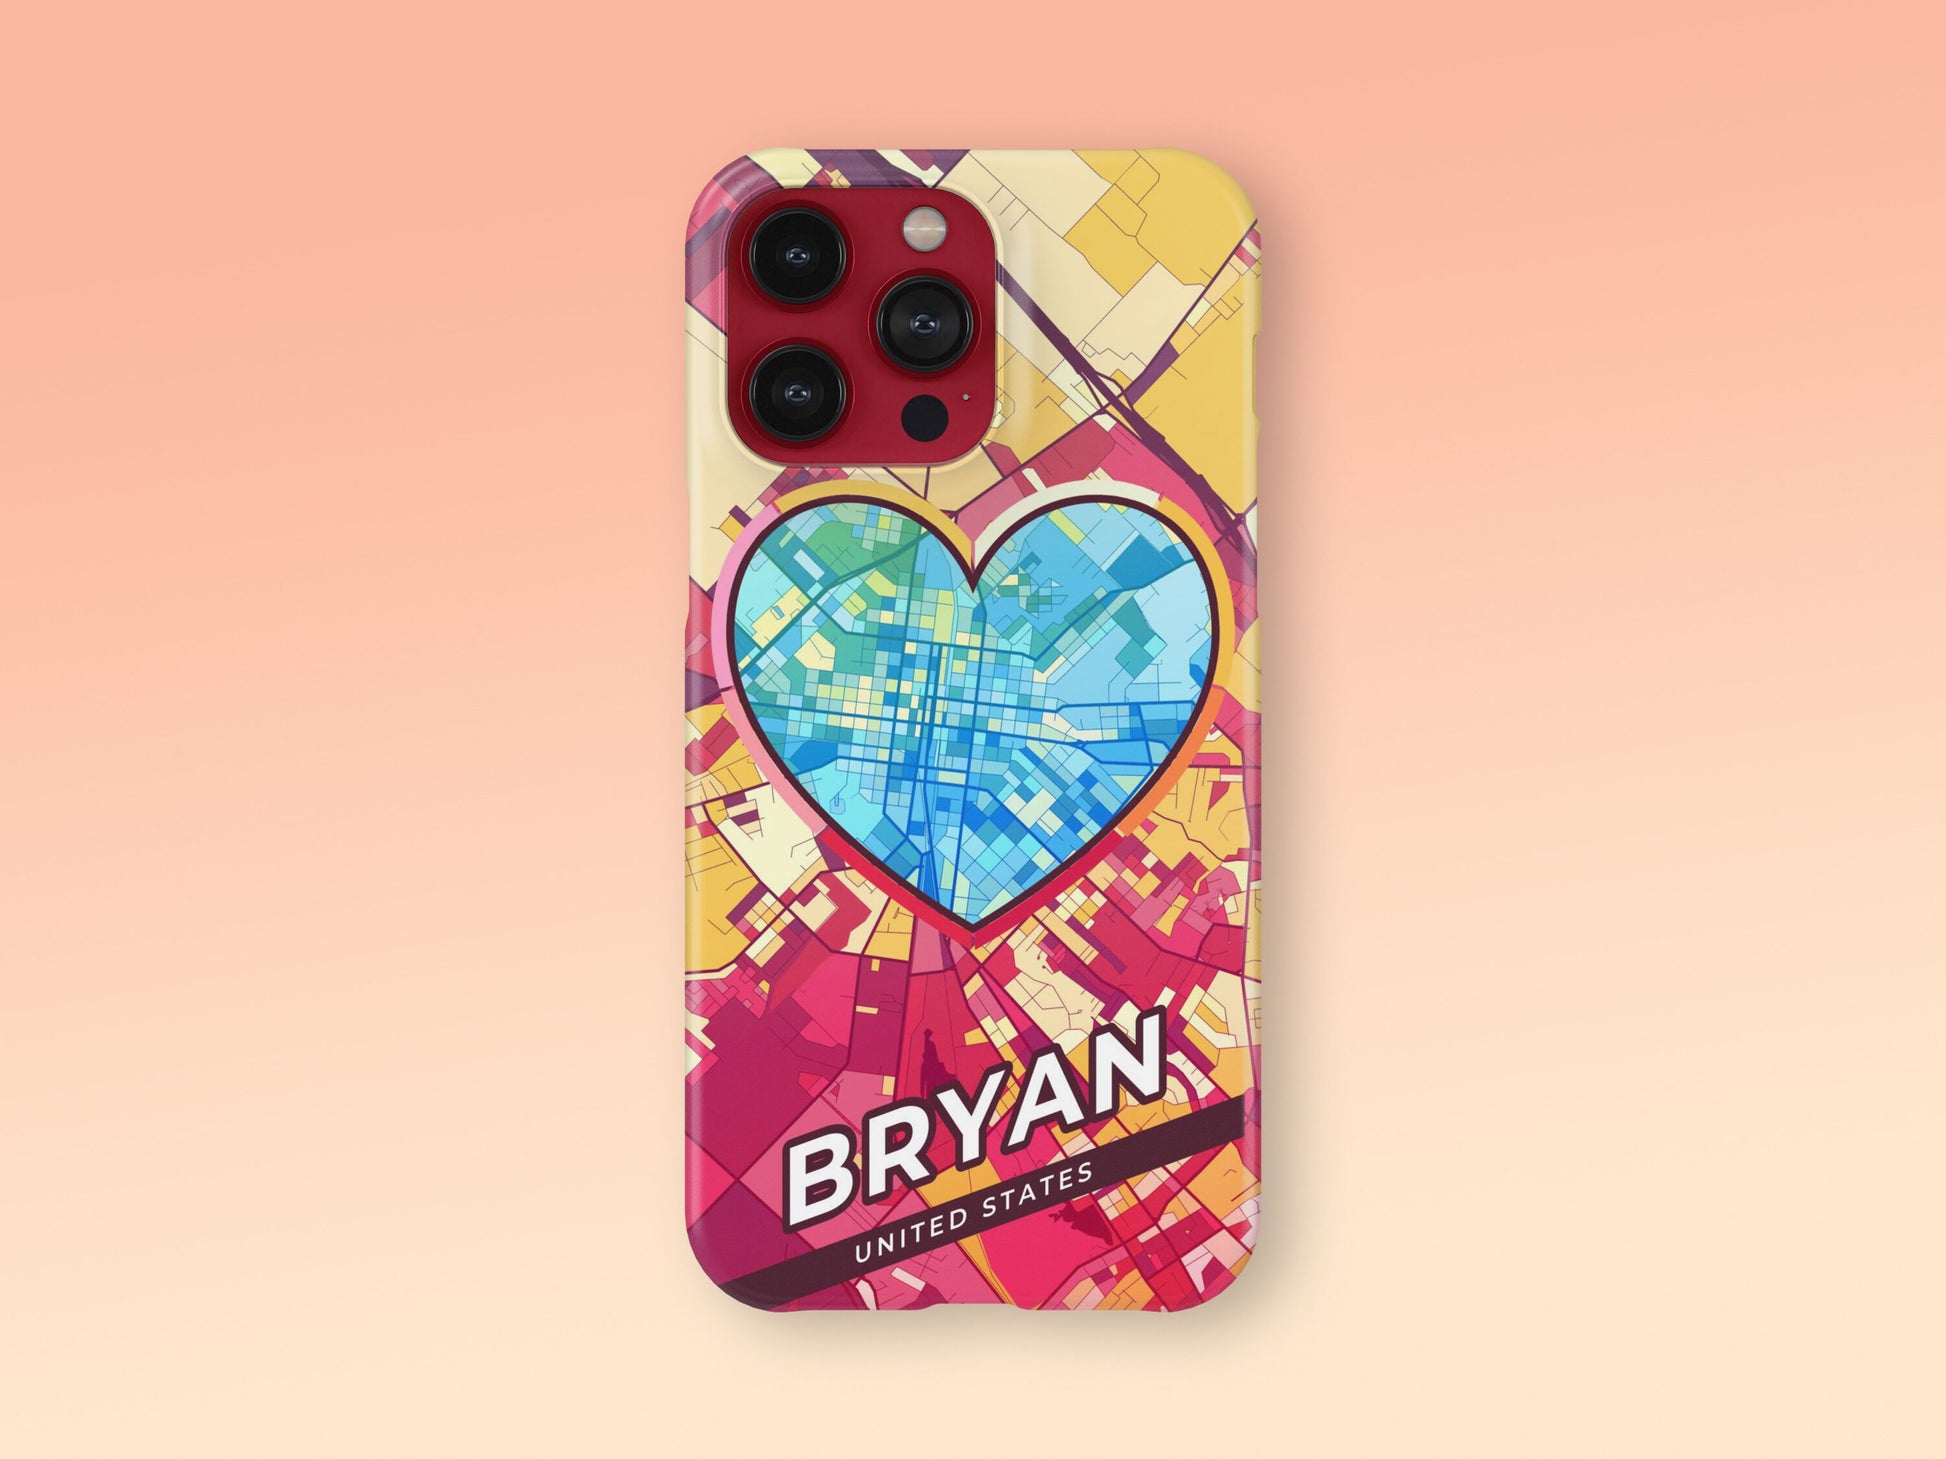 Bryan Texas slim phone case with colorful icon. Birthday, wedding or housewarming gift. Couple match cases. 2